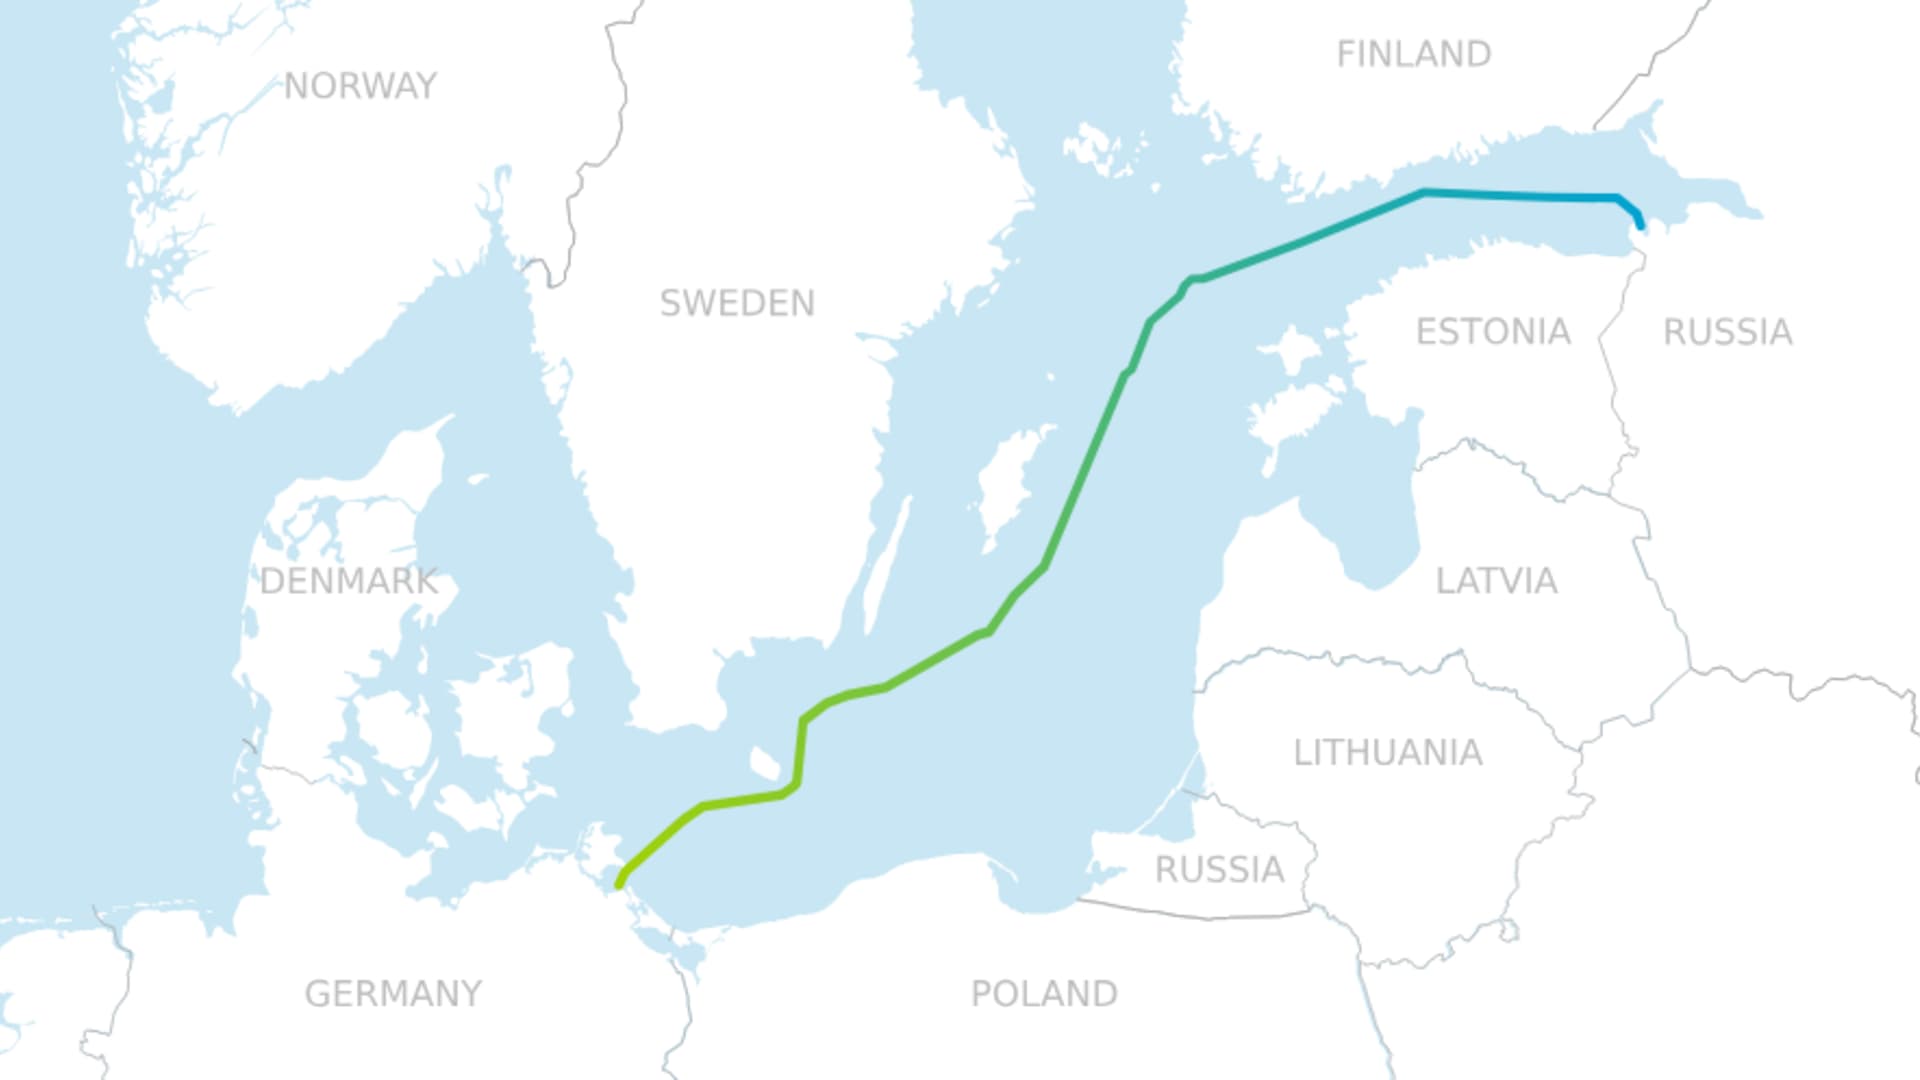 The route of a proposed new gas pipeline from Russia to Europe.